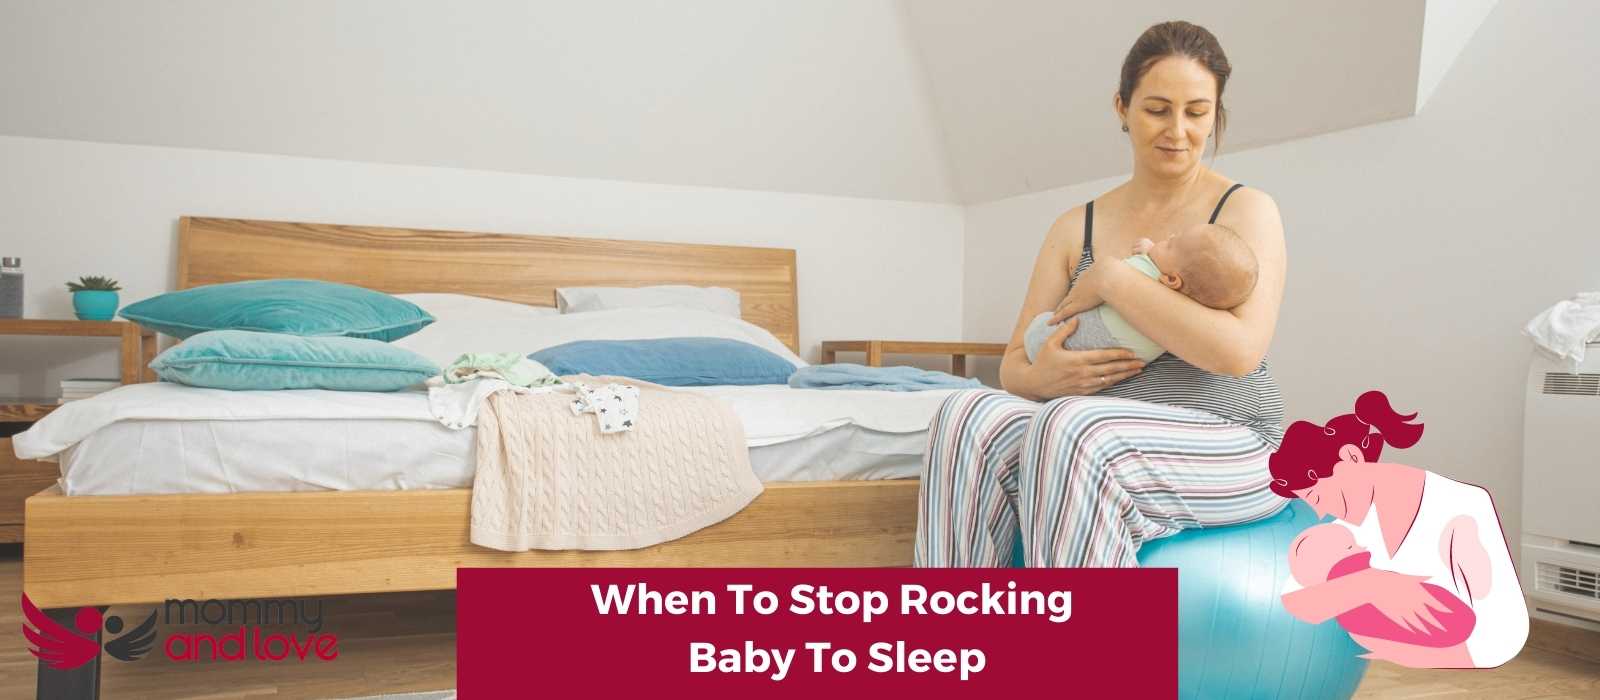 When To Stop Rocking Baby To Sleep